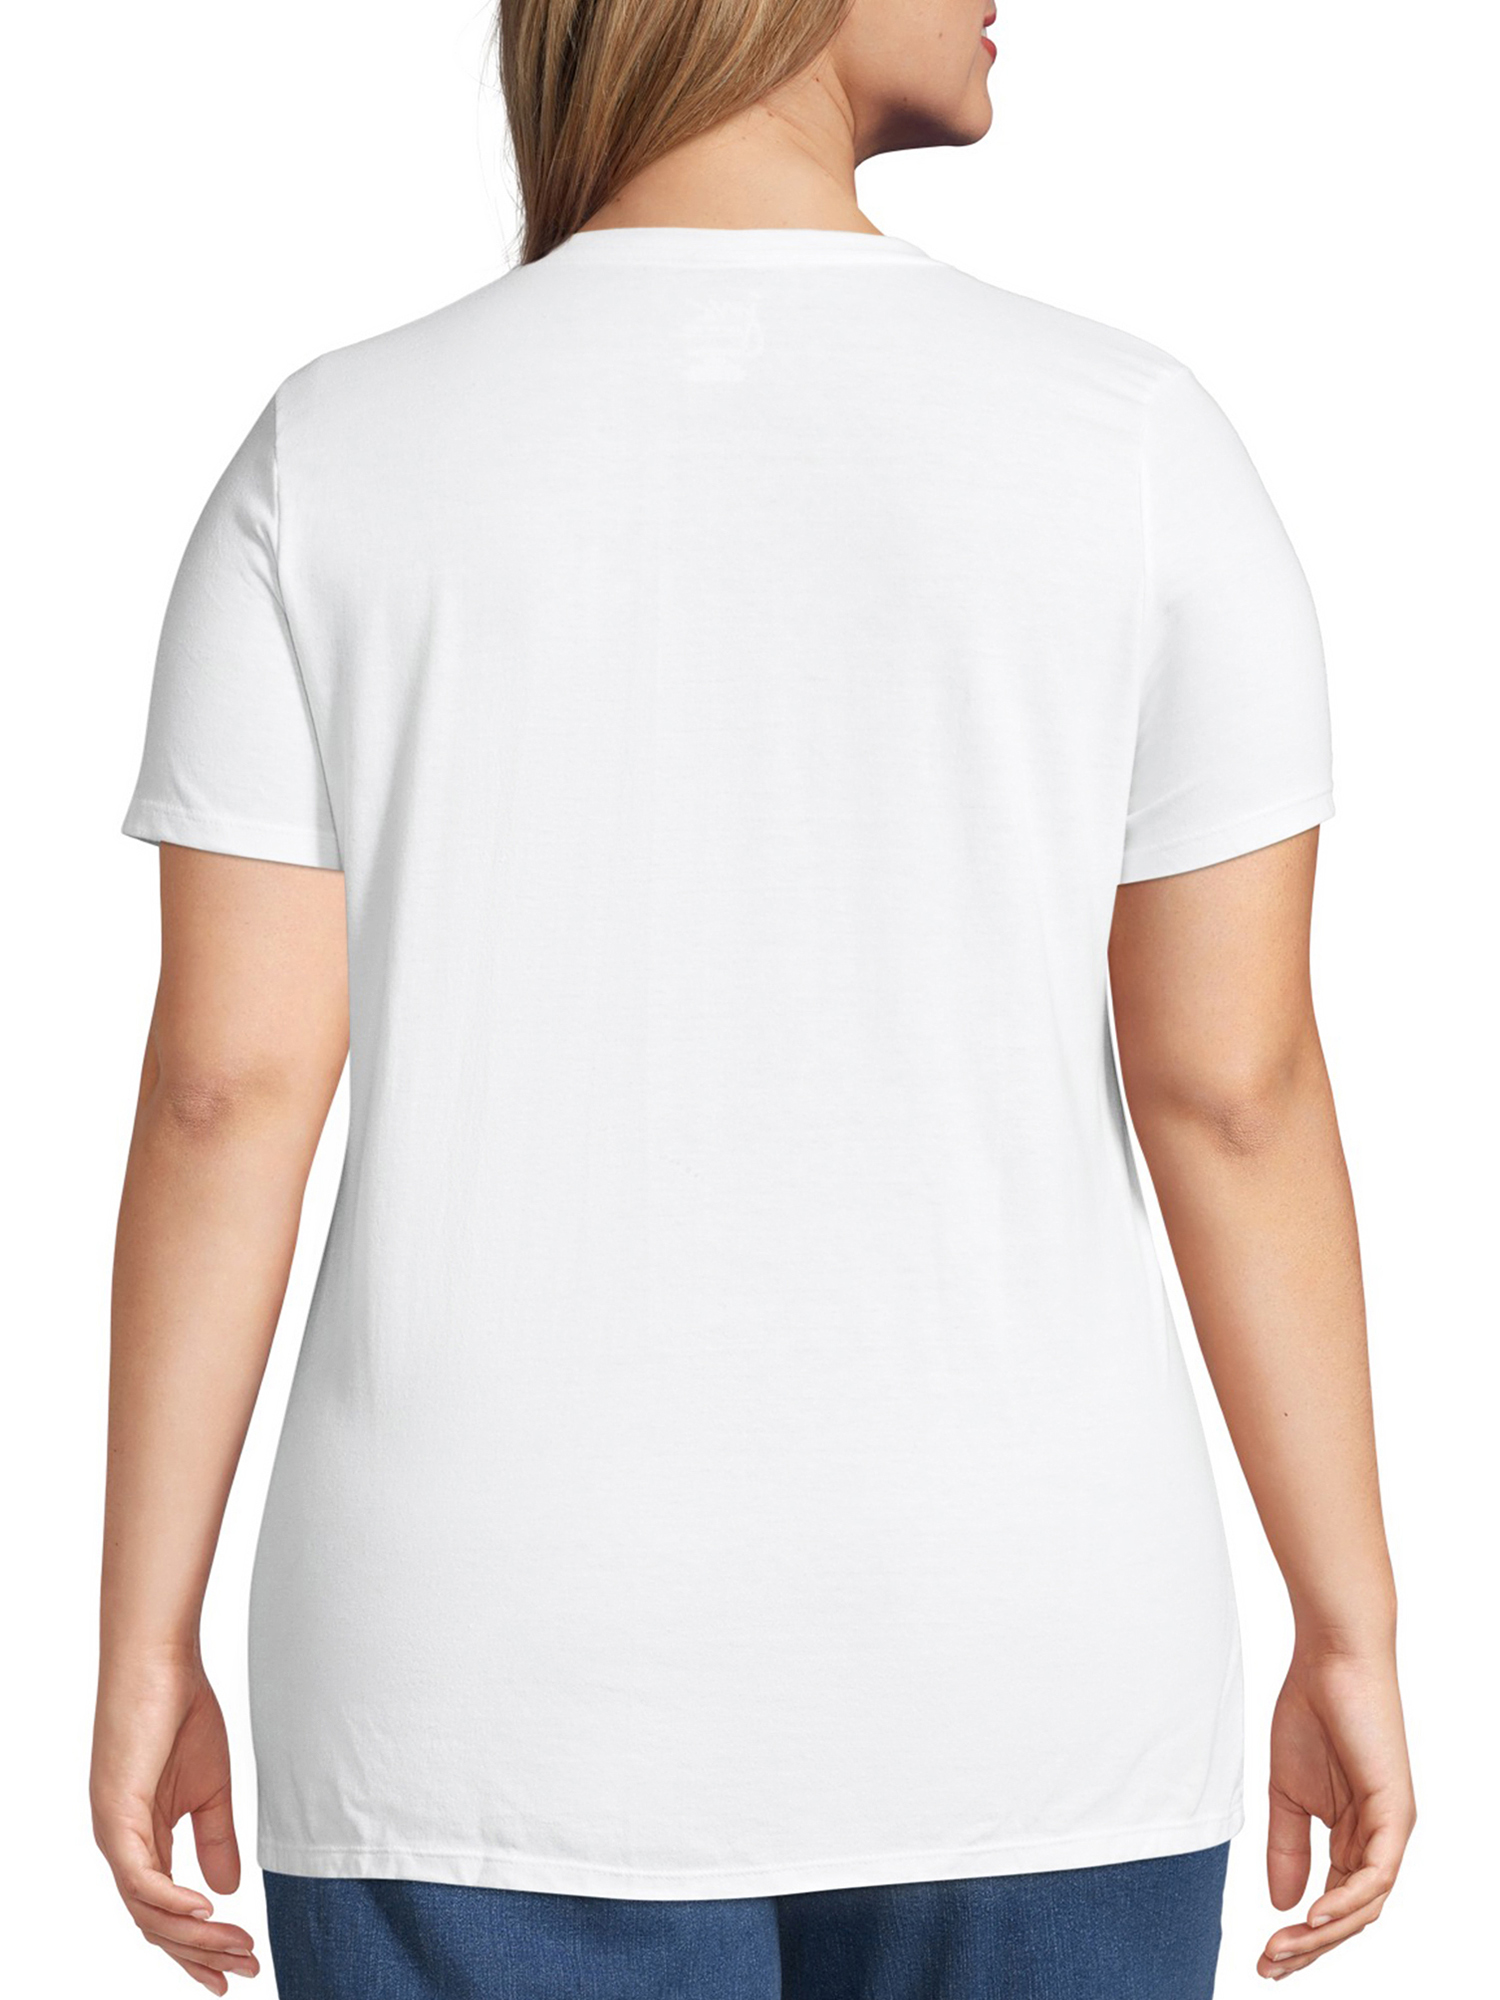 Just My Size Women's Plus Size Graphic Short Sleeve V-neck Tee - image 5 of 5